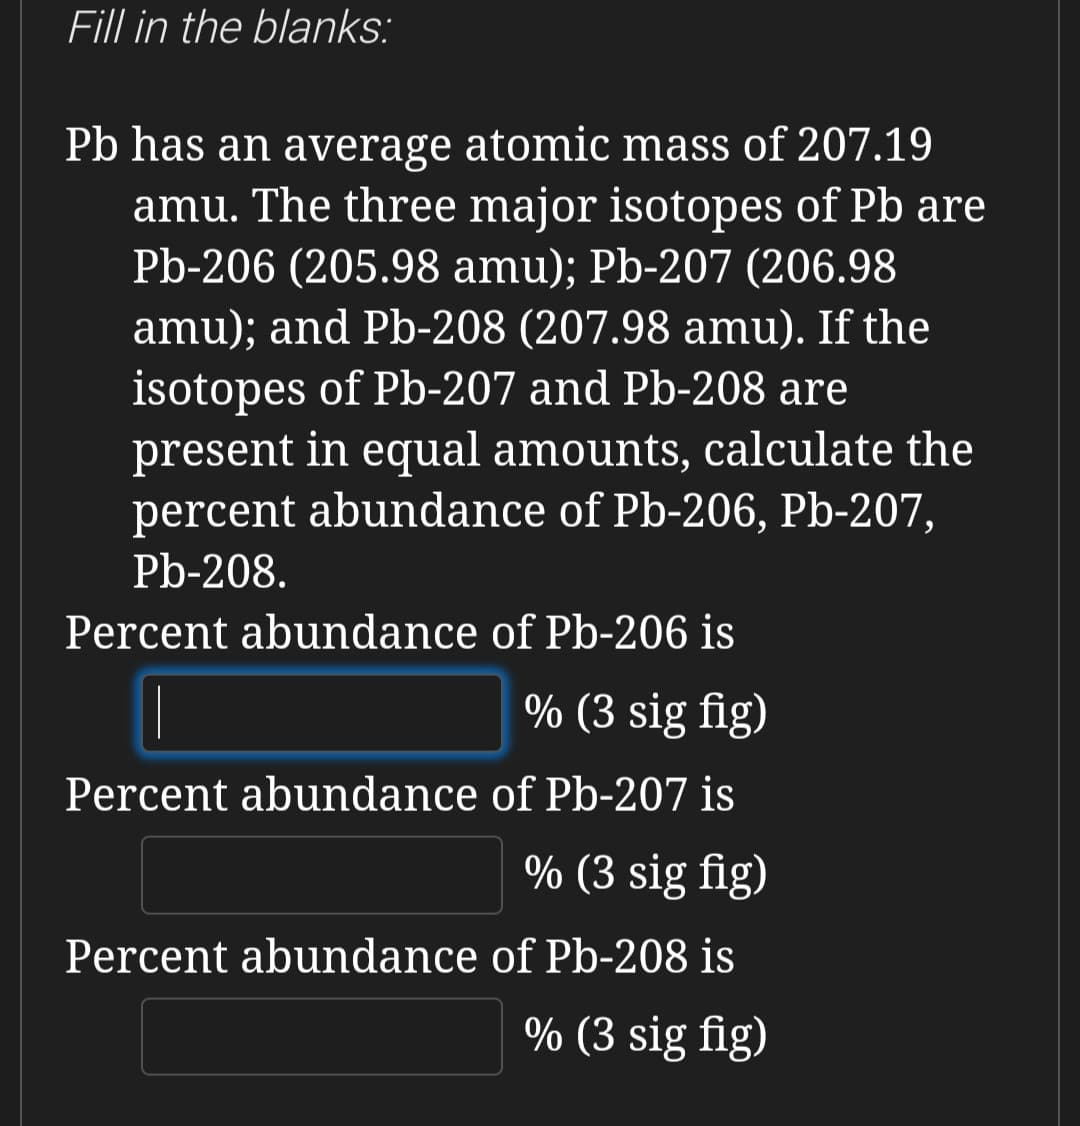 Fill in the blanks:
Pb has an average atomic mass of 207.19
amu. The three major isotopes of Pb are
Pb-206 (205.98 amu); Pb-207 (206.98
amu); and Pb-208 (207.98 amu). If the
isotopes of Pb-207 and Pb-208 are
present in equal amounts, calculate the
percent abundance of Pb-206, Pb-207,
Pb-208.
Percent abundance of Pb-206 is
% (3 sig fig)
Percent abundance of Pb-207 is
% (3 sig fig)
Percent abundance of Pb-208 is
% (3 sig fig)
